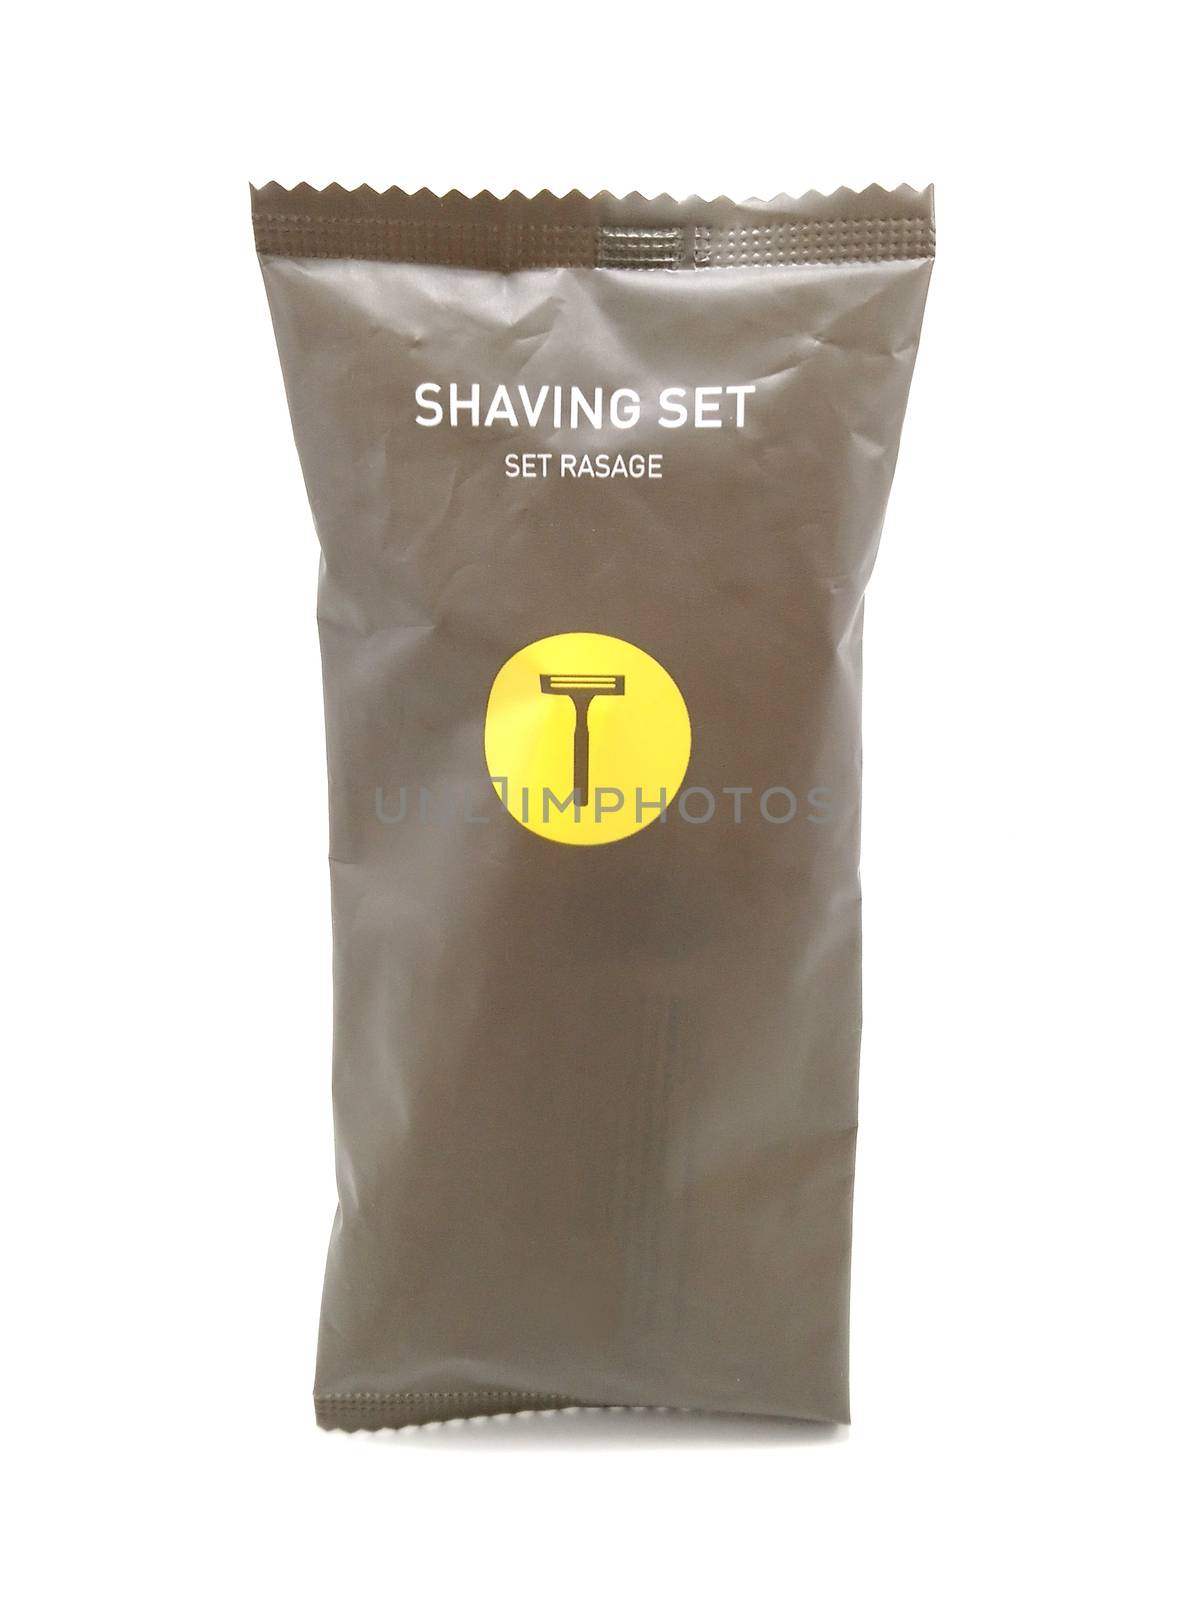 Shaving set small pack hotel complimentary toiletries consists of manual shaver and shaving cream tube